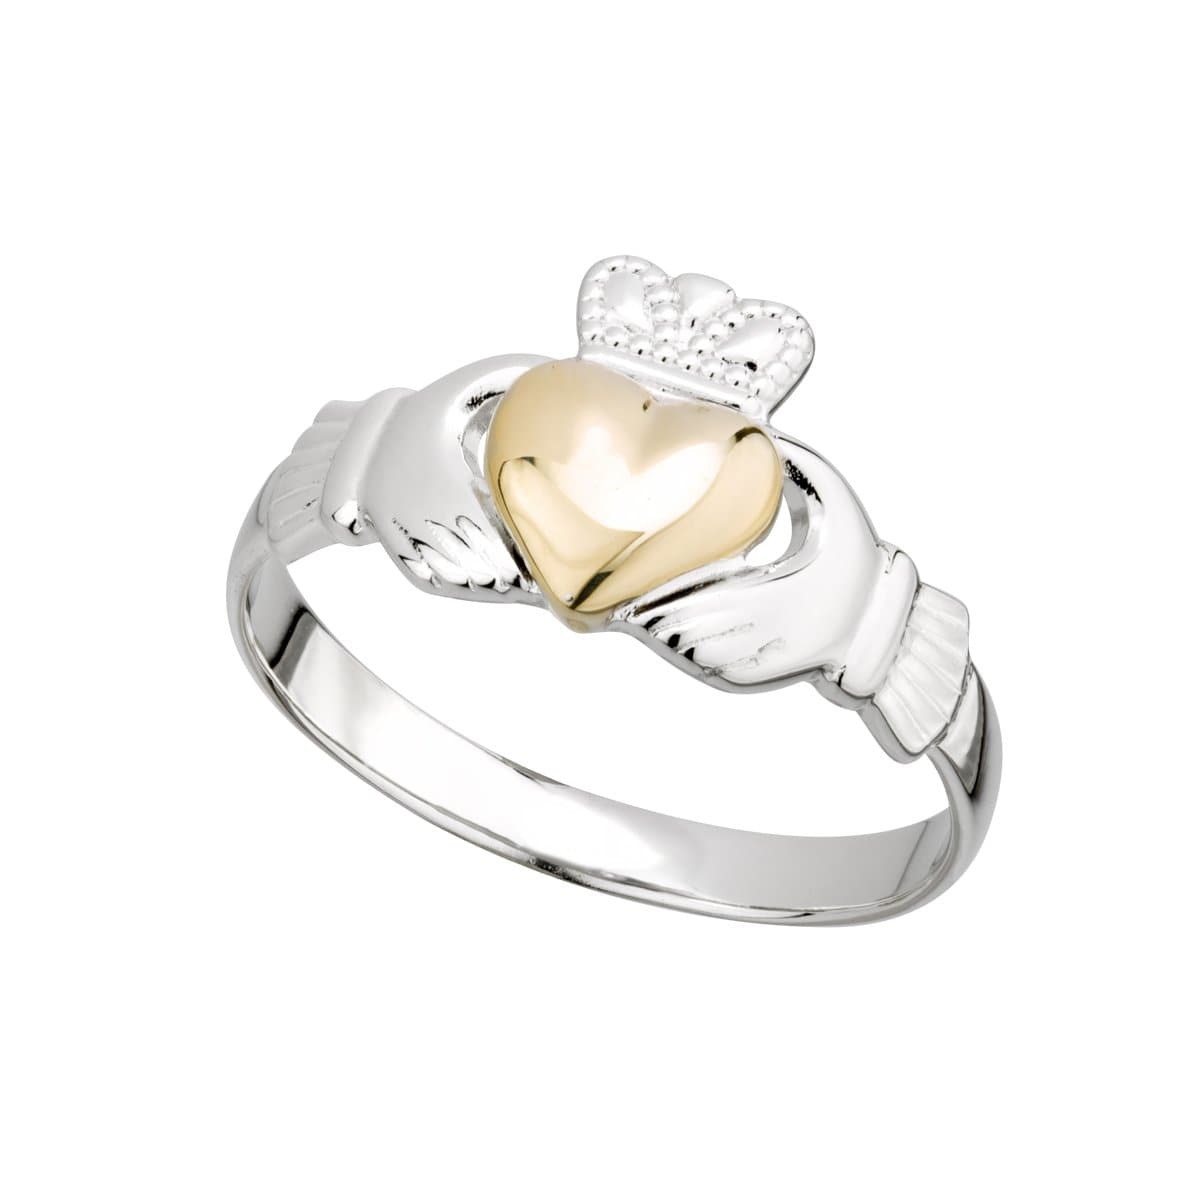 Classic Ladies Gold Claddagh Ring | CladdaghRings.com